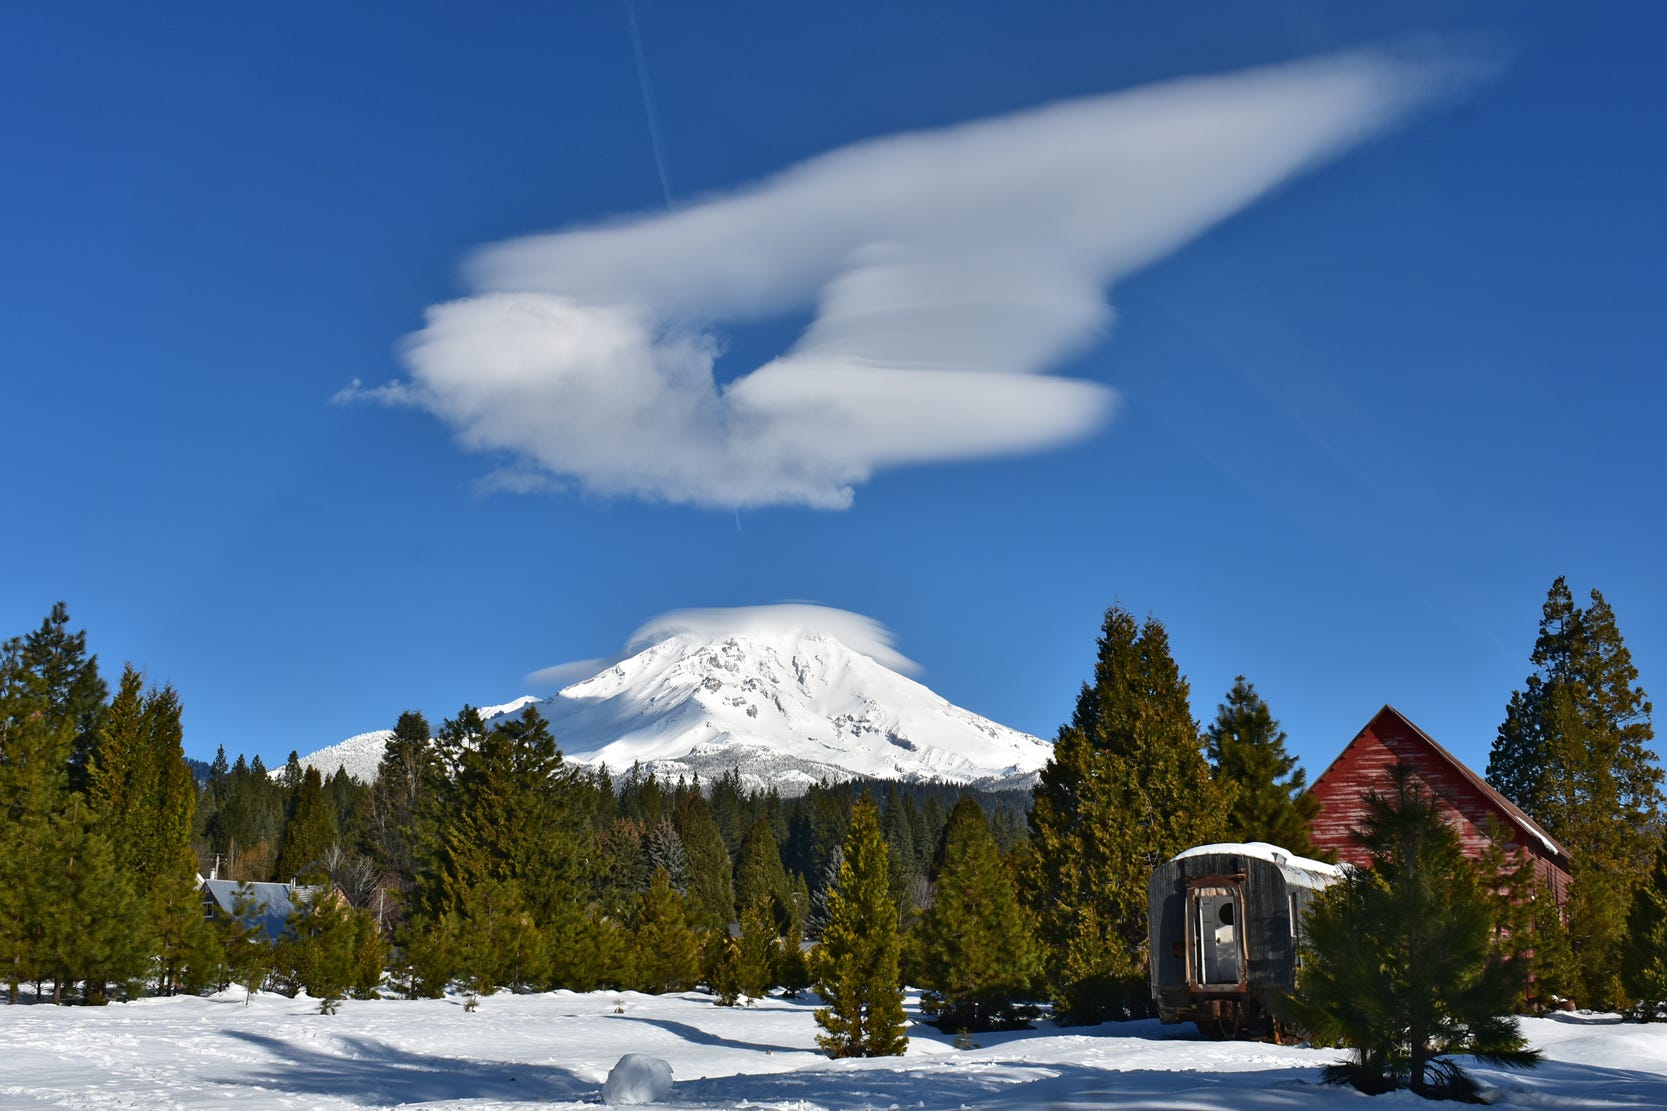 An interesting lenticular formation over a snow-covered Mt. Shasta, as seen from McCloud.